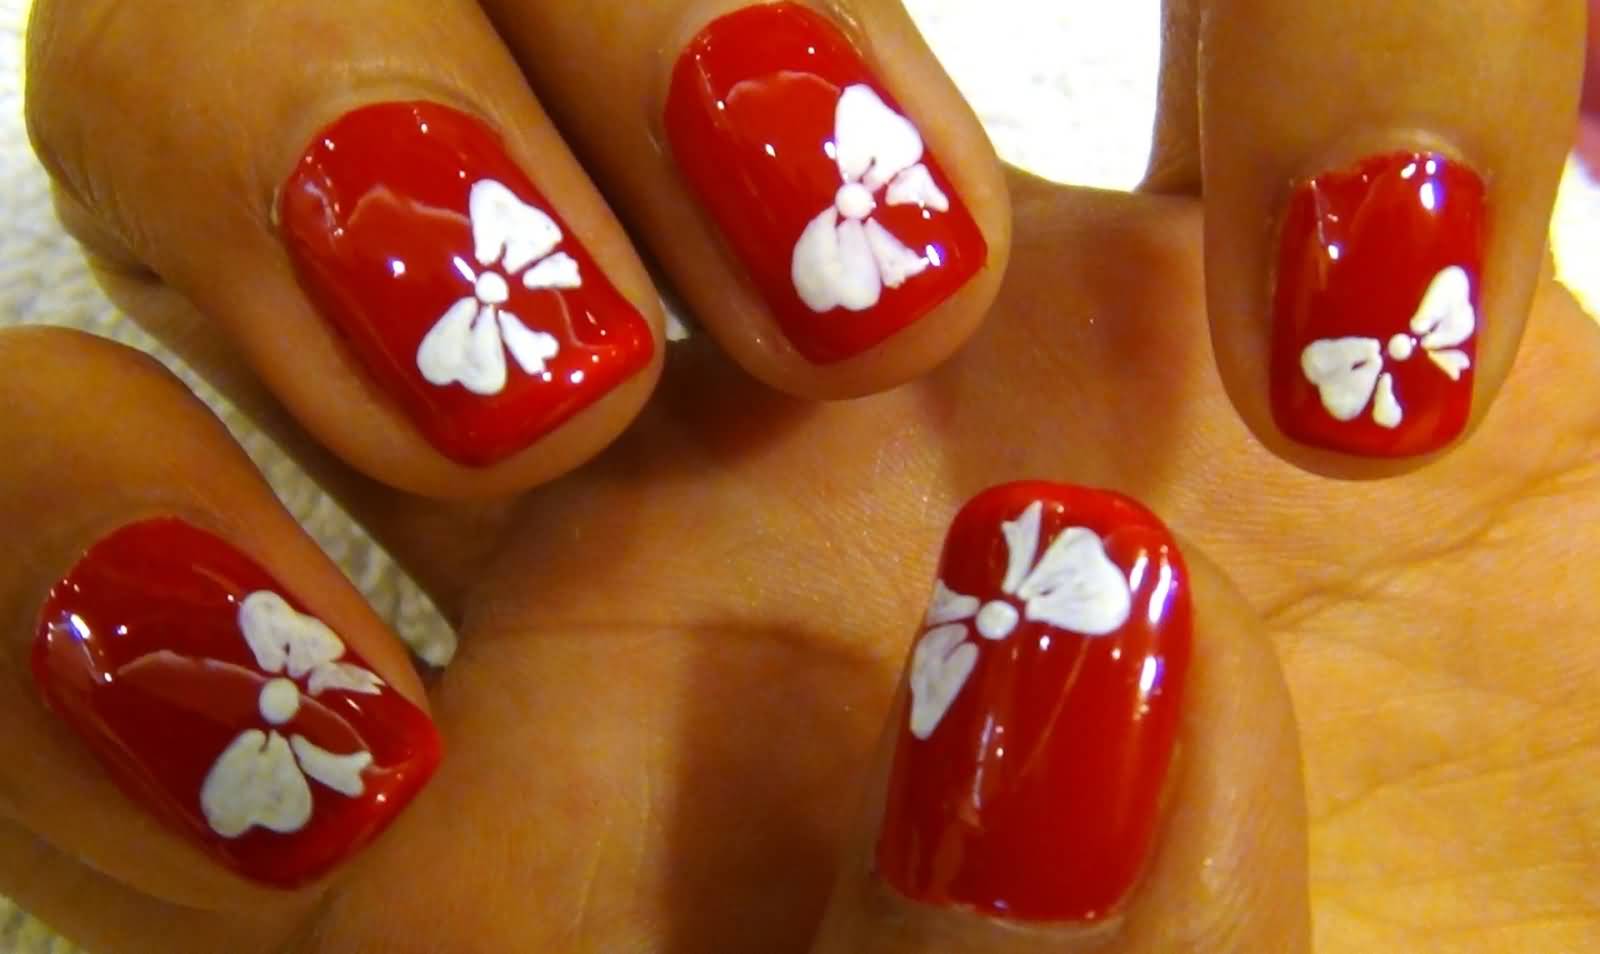 Red Flossy Nails With White Bows Nail Art